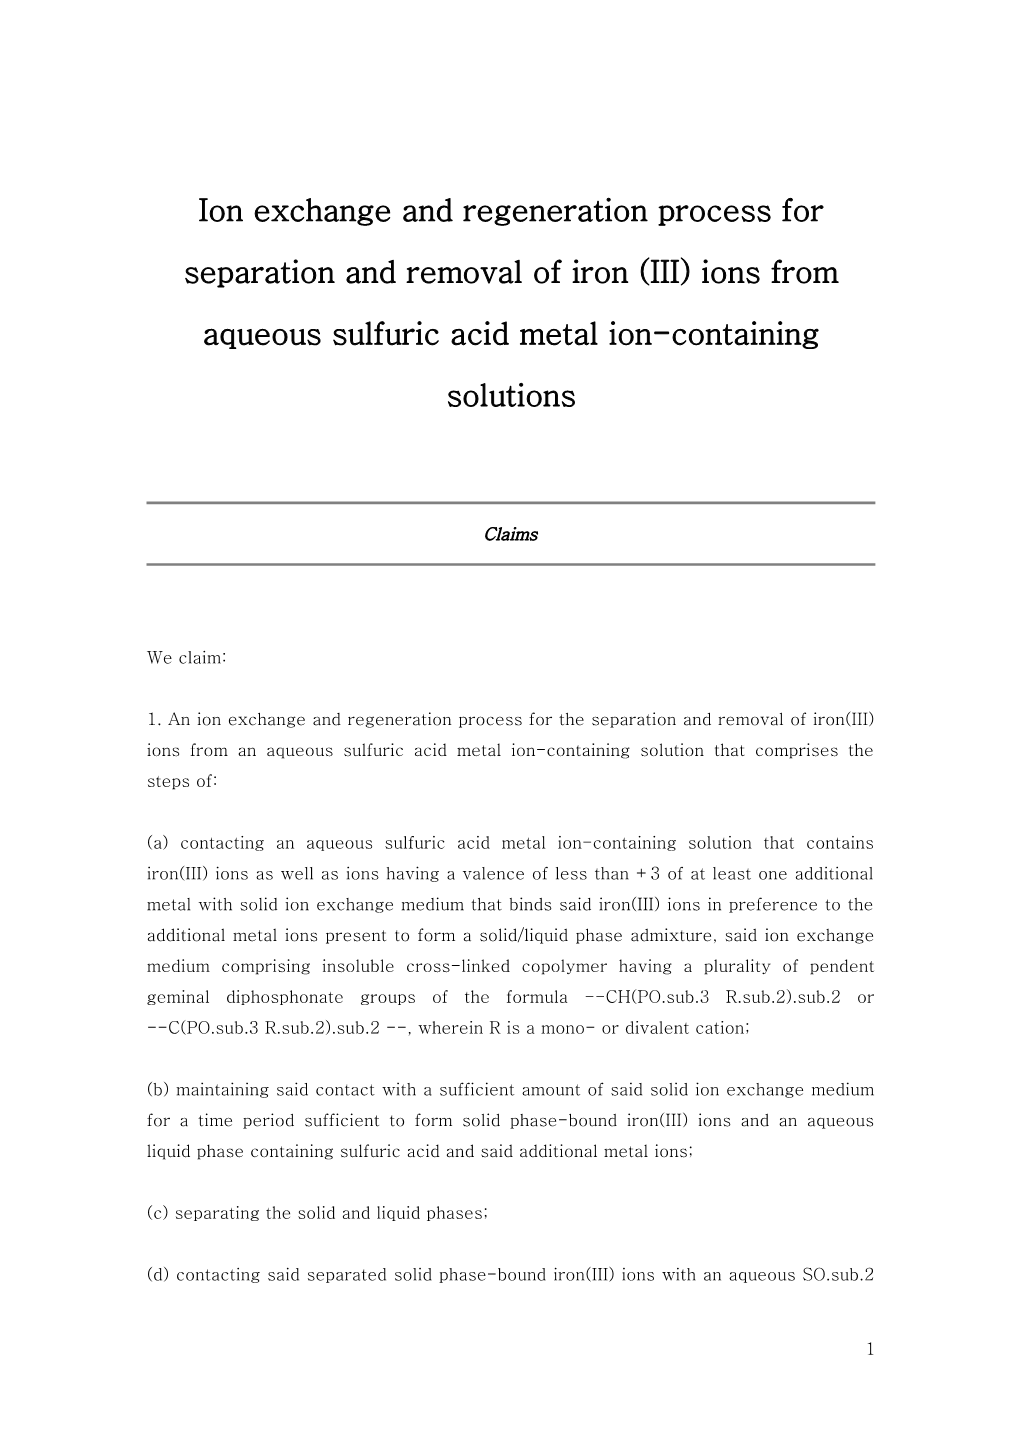 Ion Exchange and Regeneration Process for Separation and Removal of Iron (III) Ions From